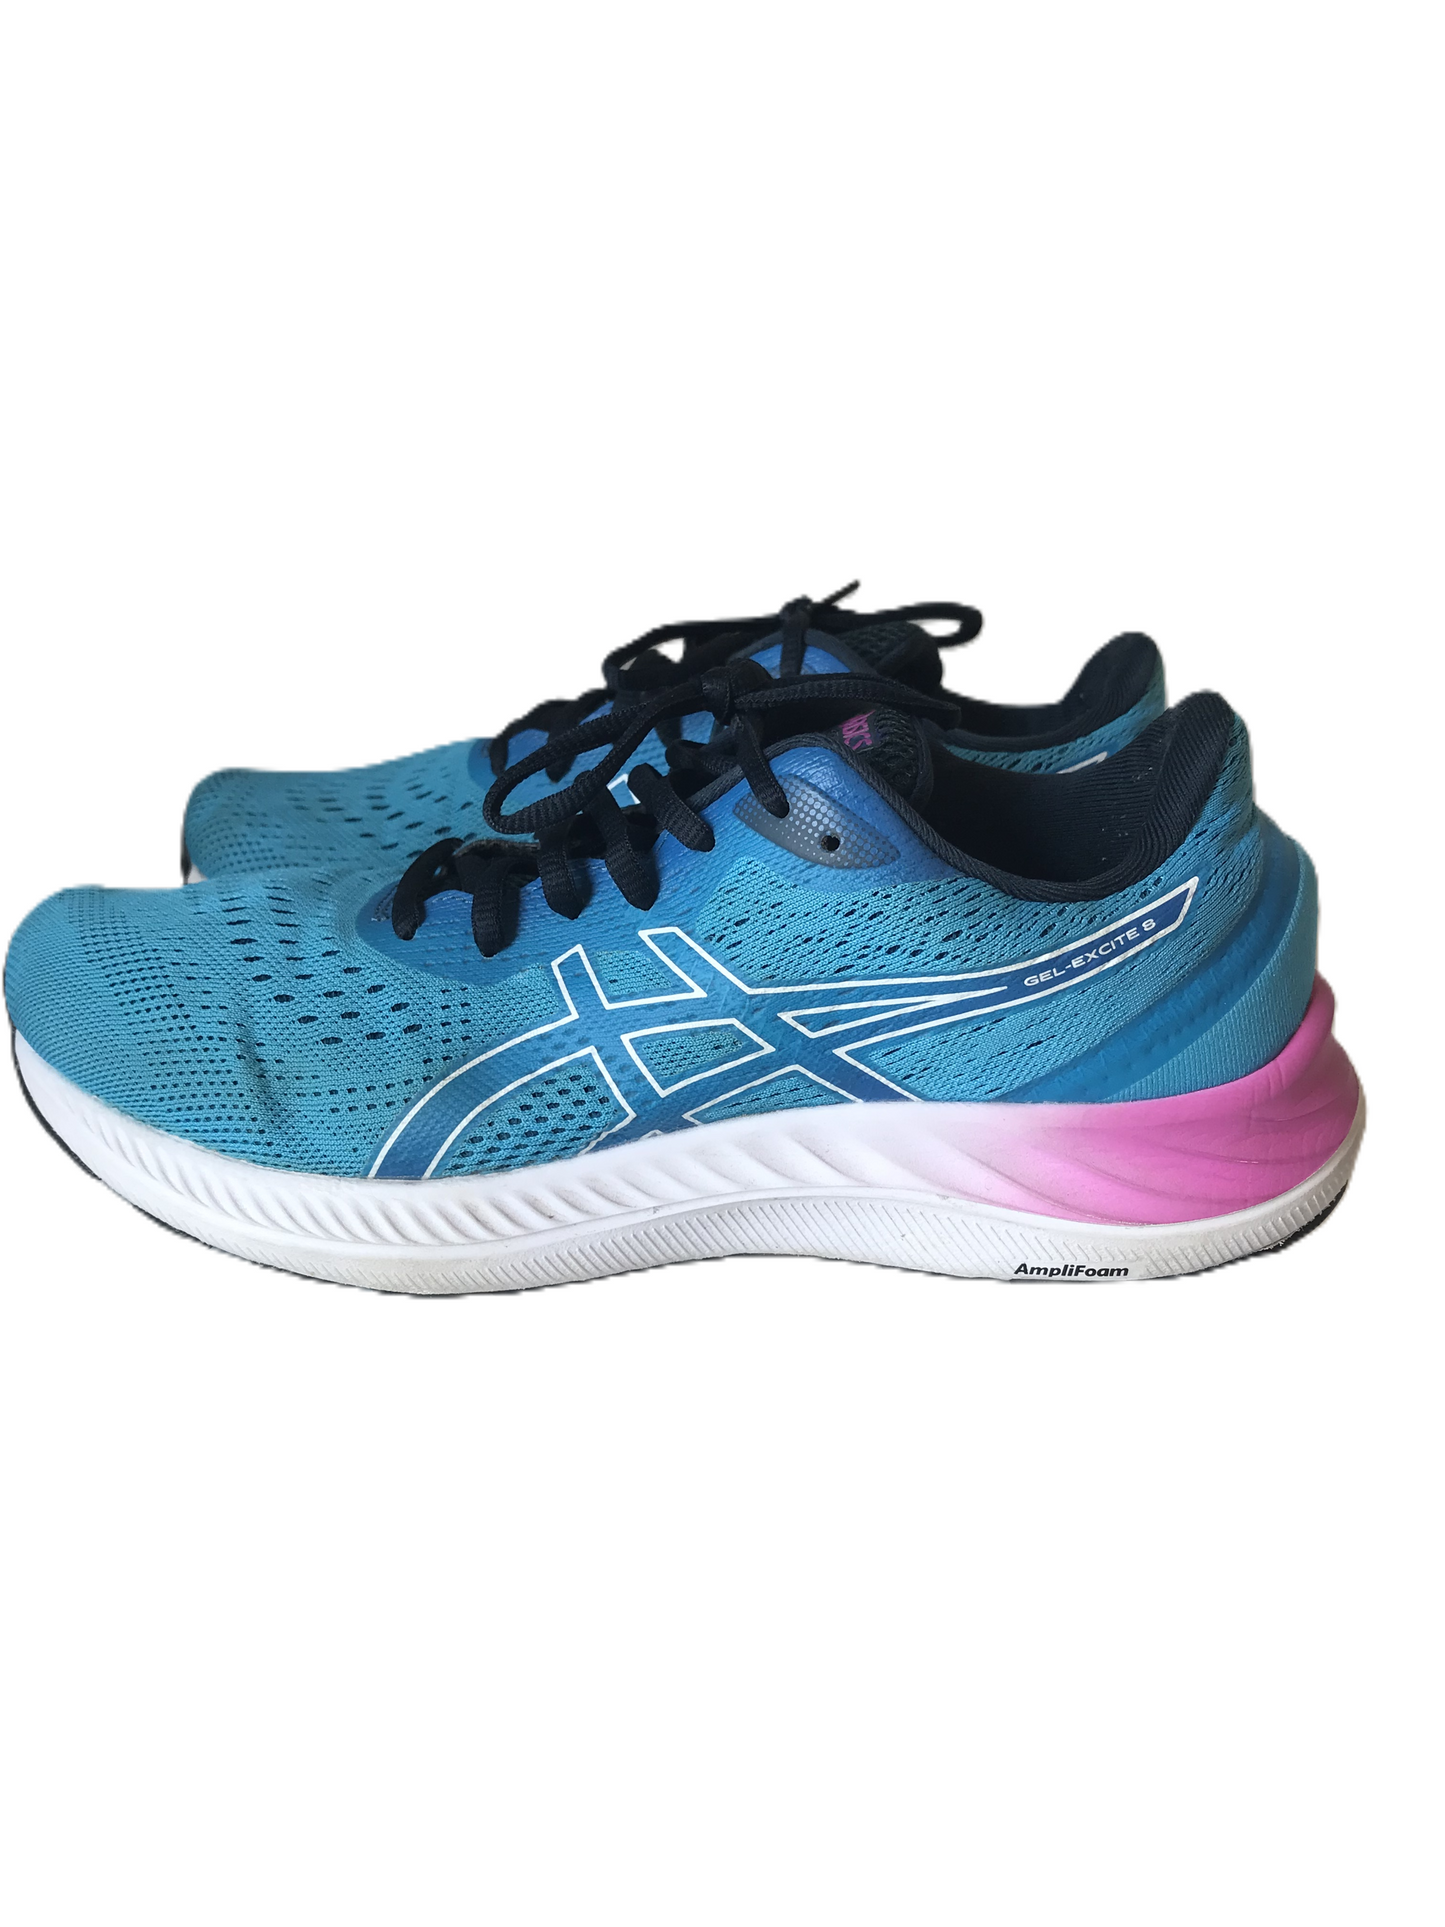 Blue Shoes Athletic By Asics, Size: 9.5